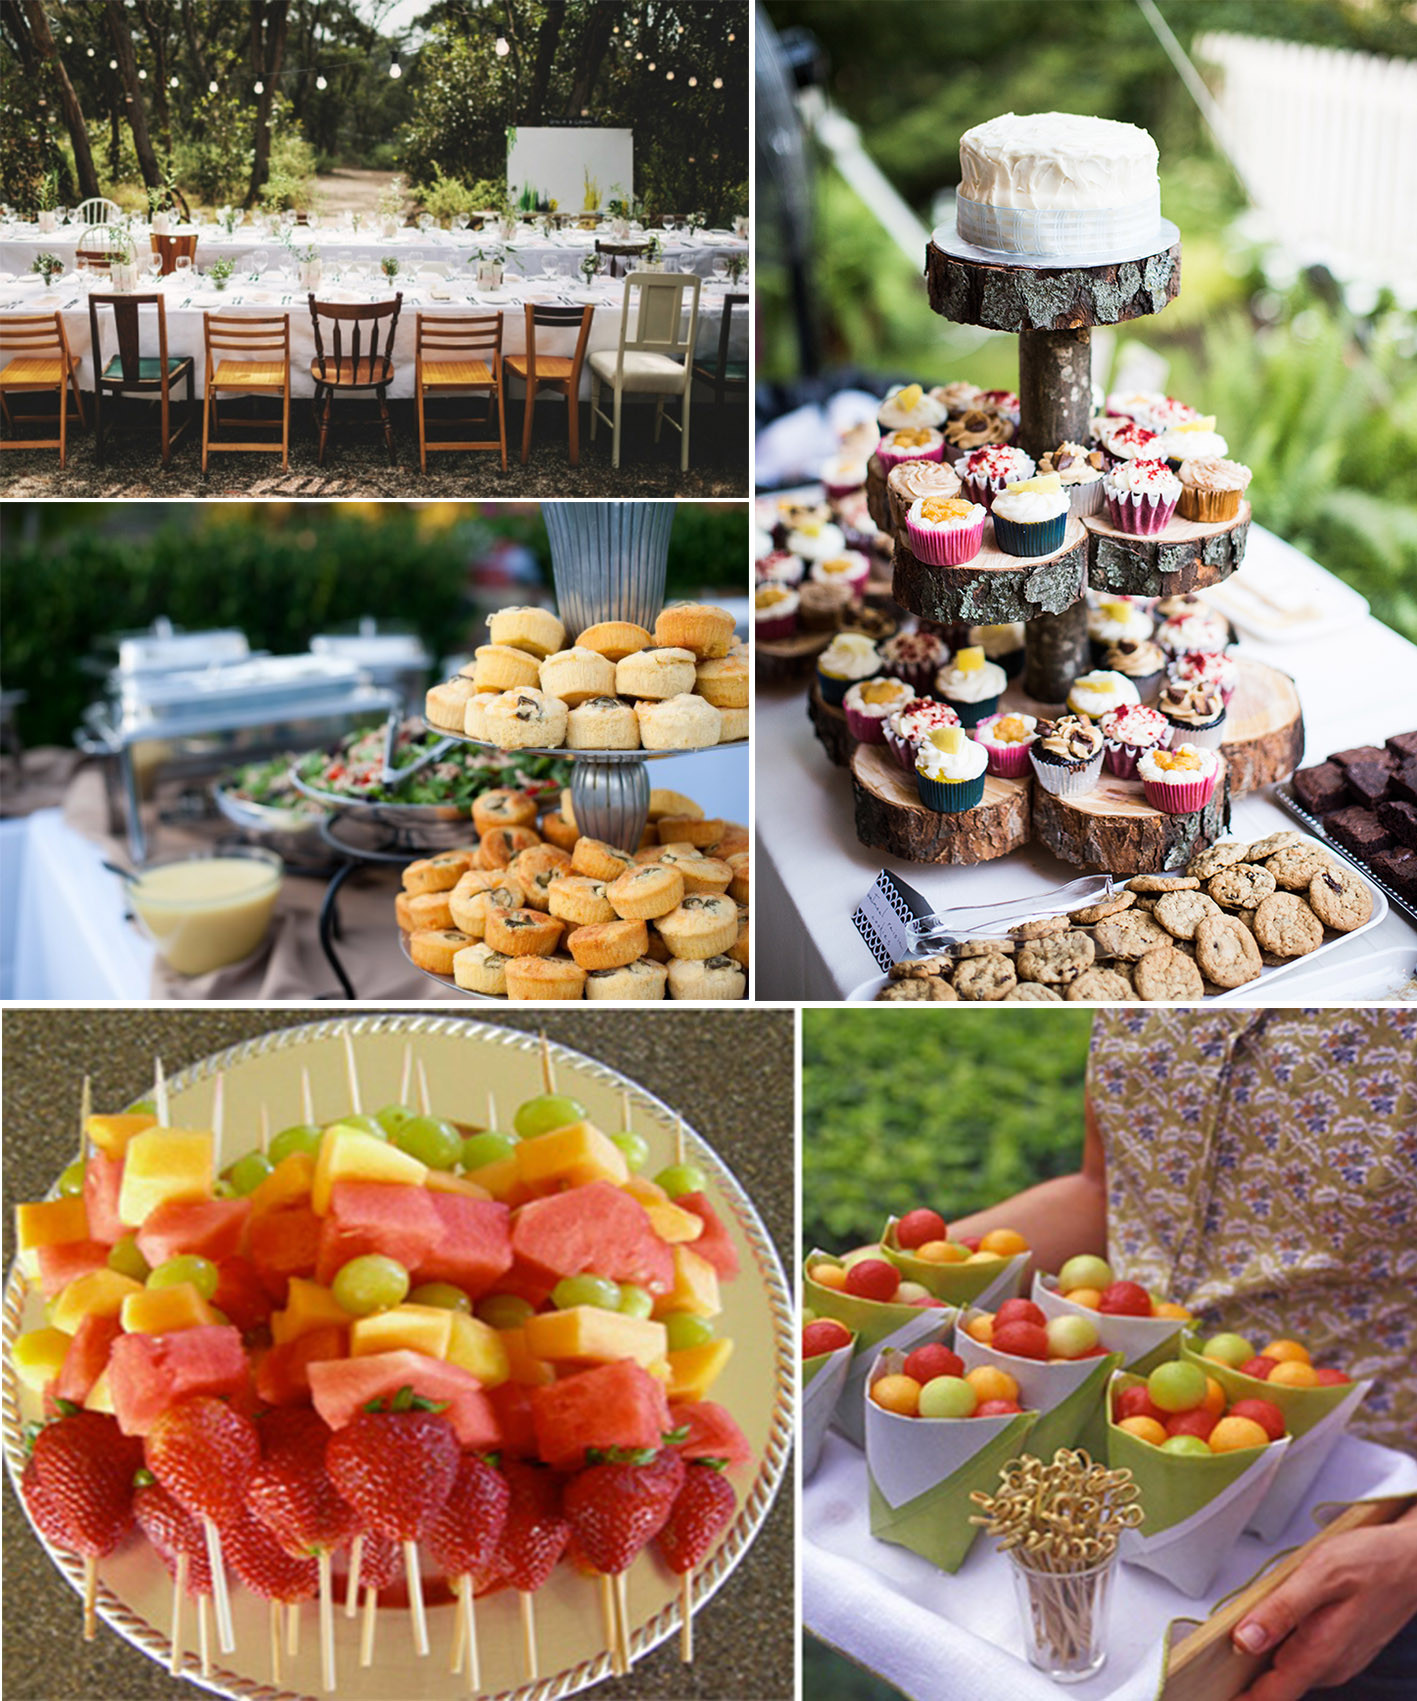 Ideas For Party Food
 How to play a backyard themed wedding – lianggeyuan123